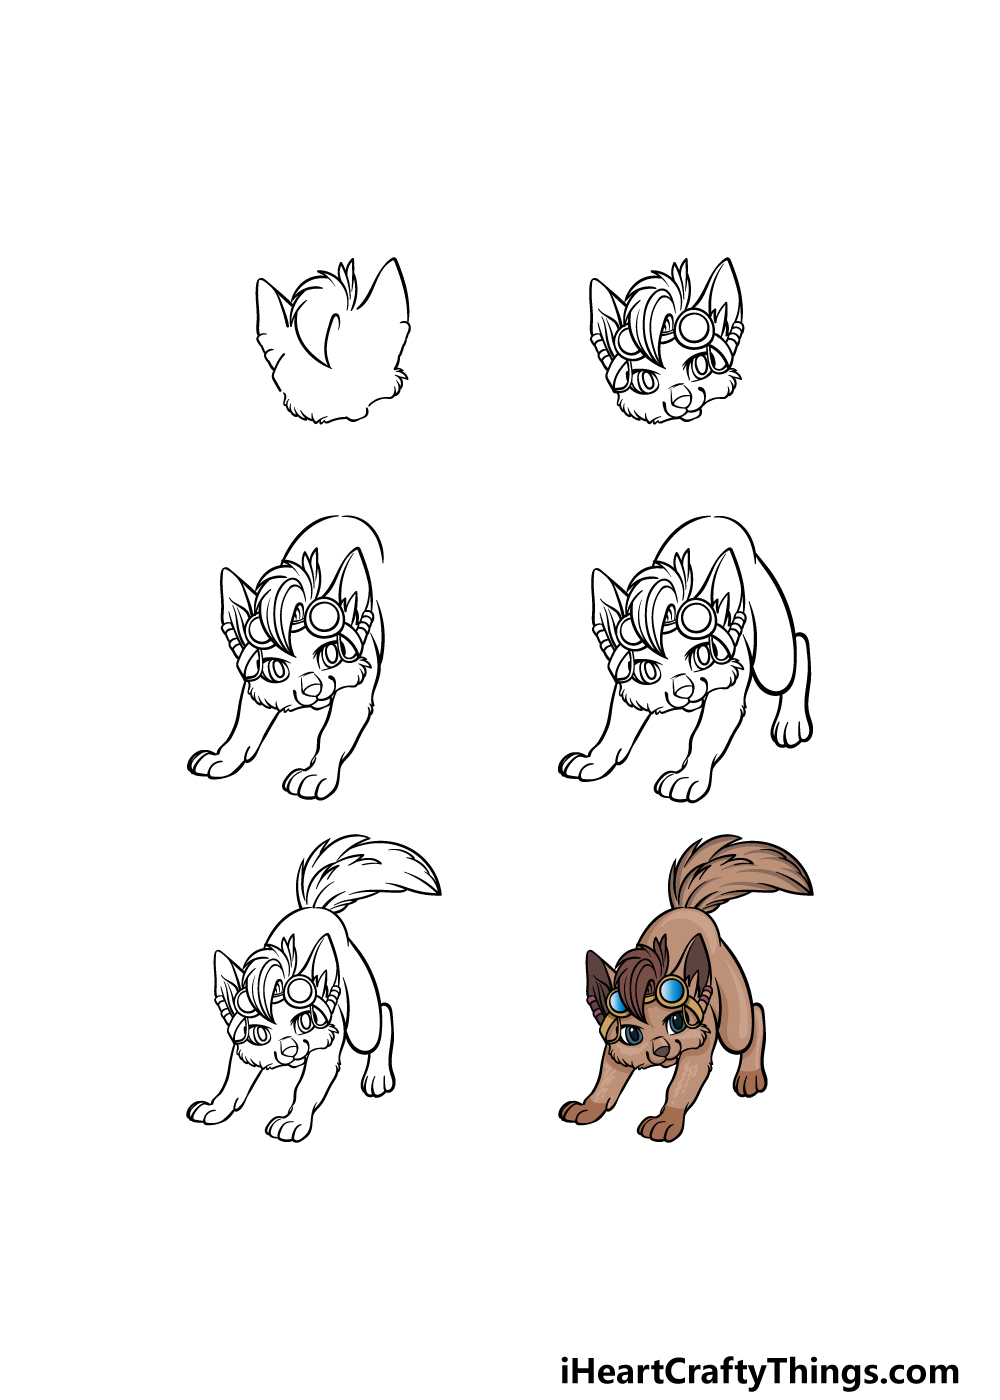 Anime Dog Drawing - How To Draw Anime Dog Step By Step